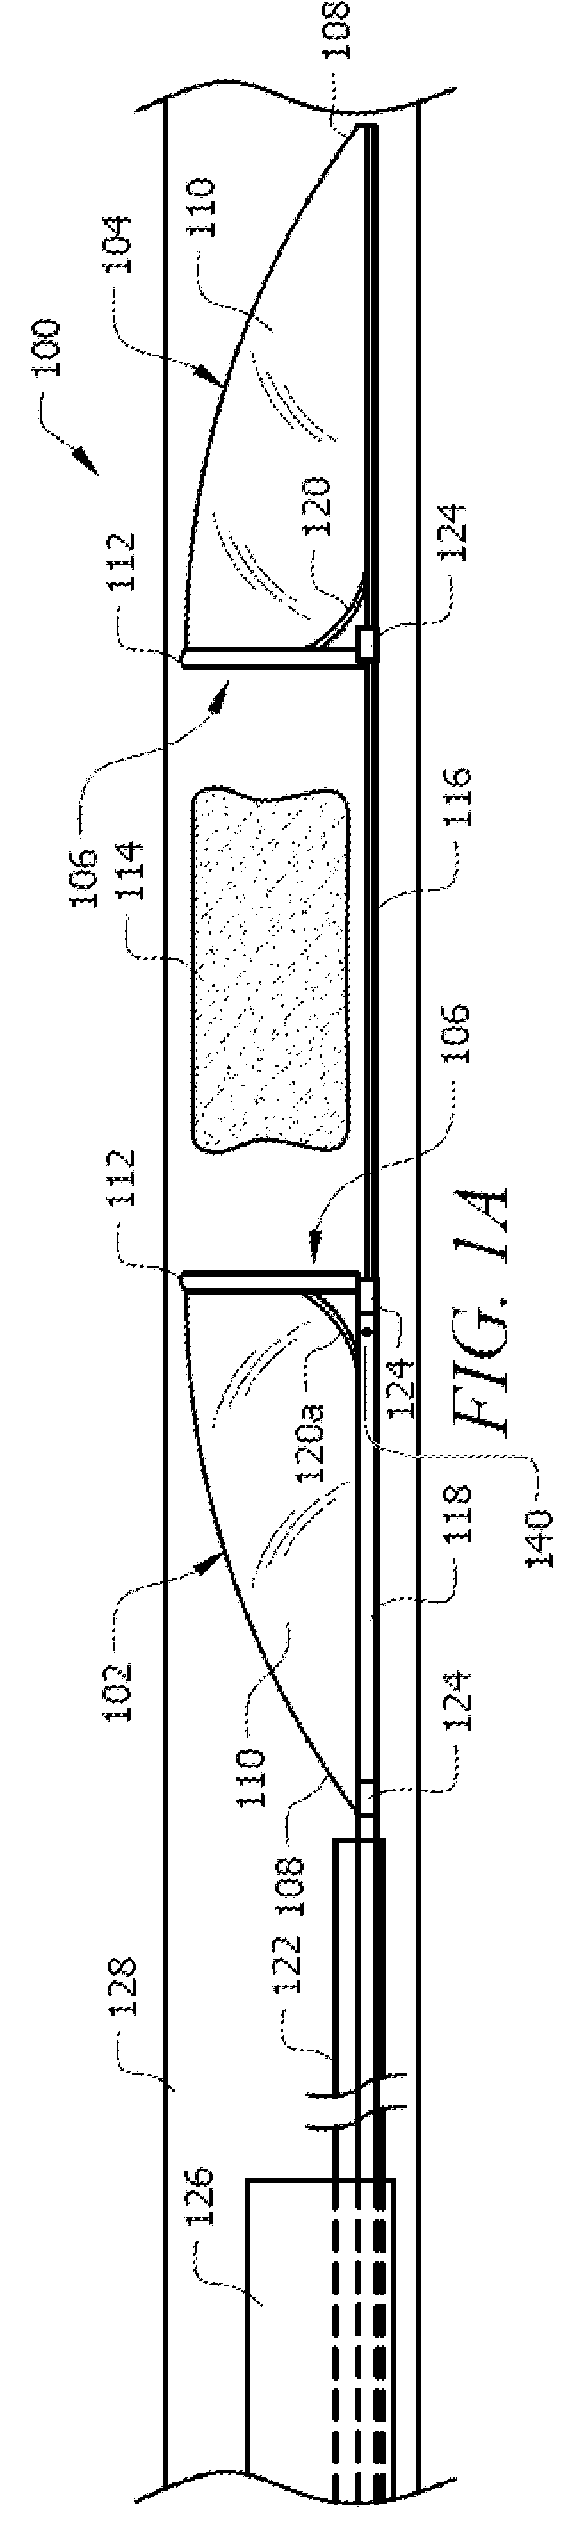 Clot removal device and method of using same